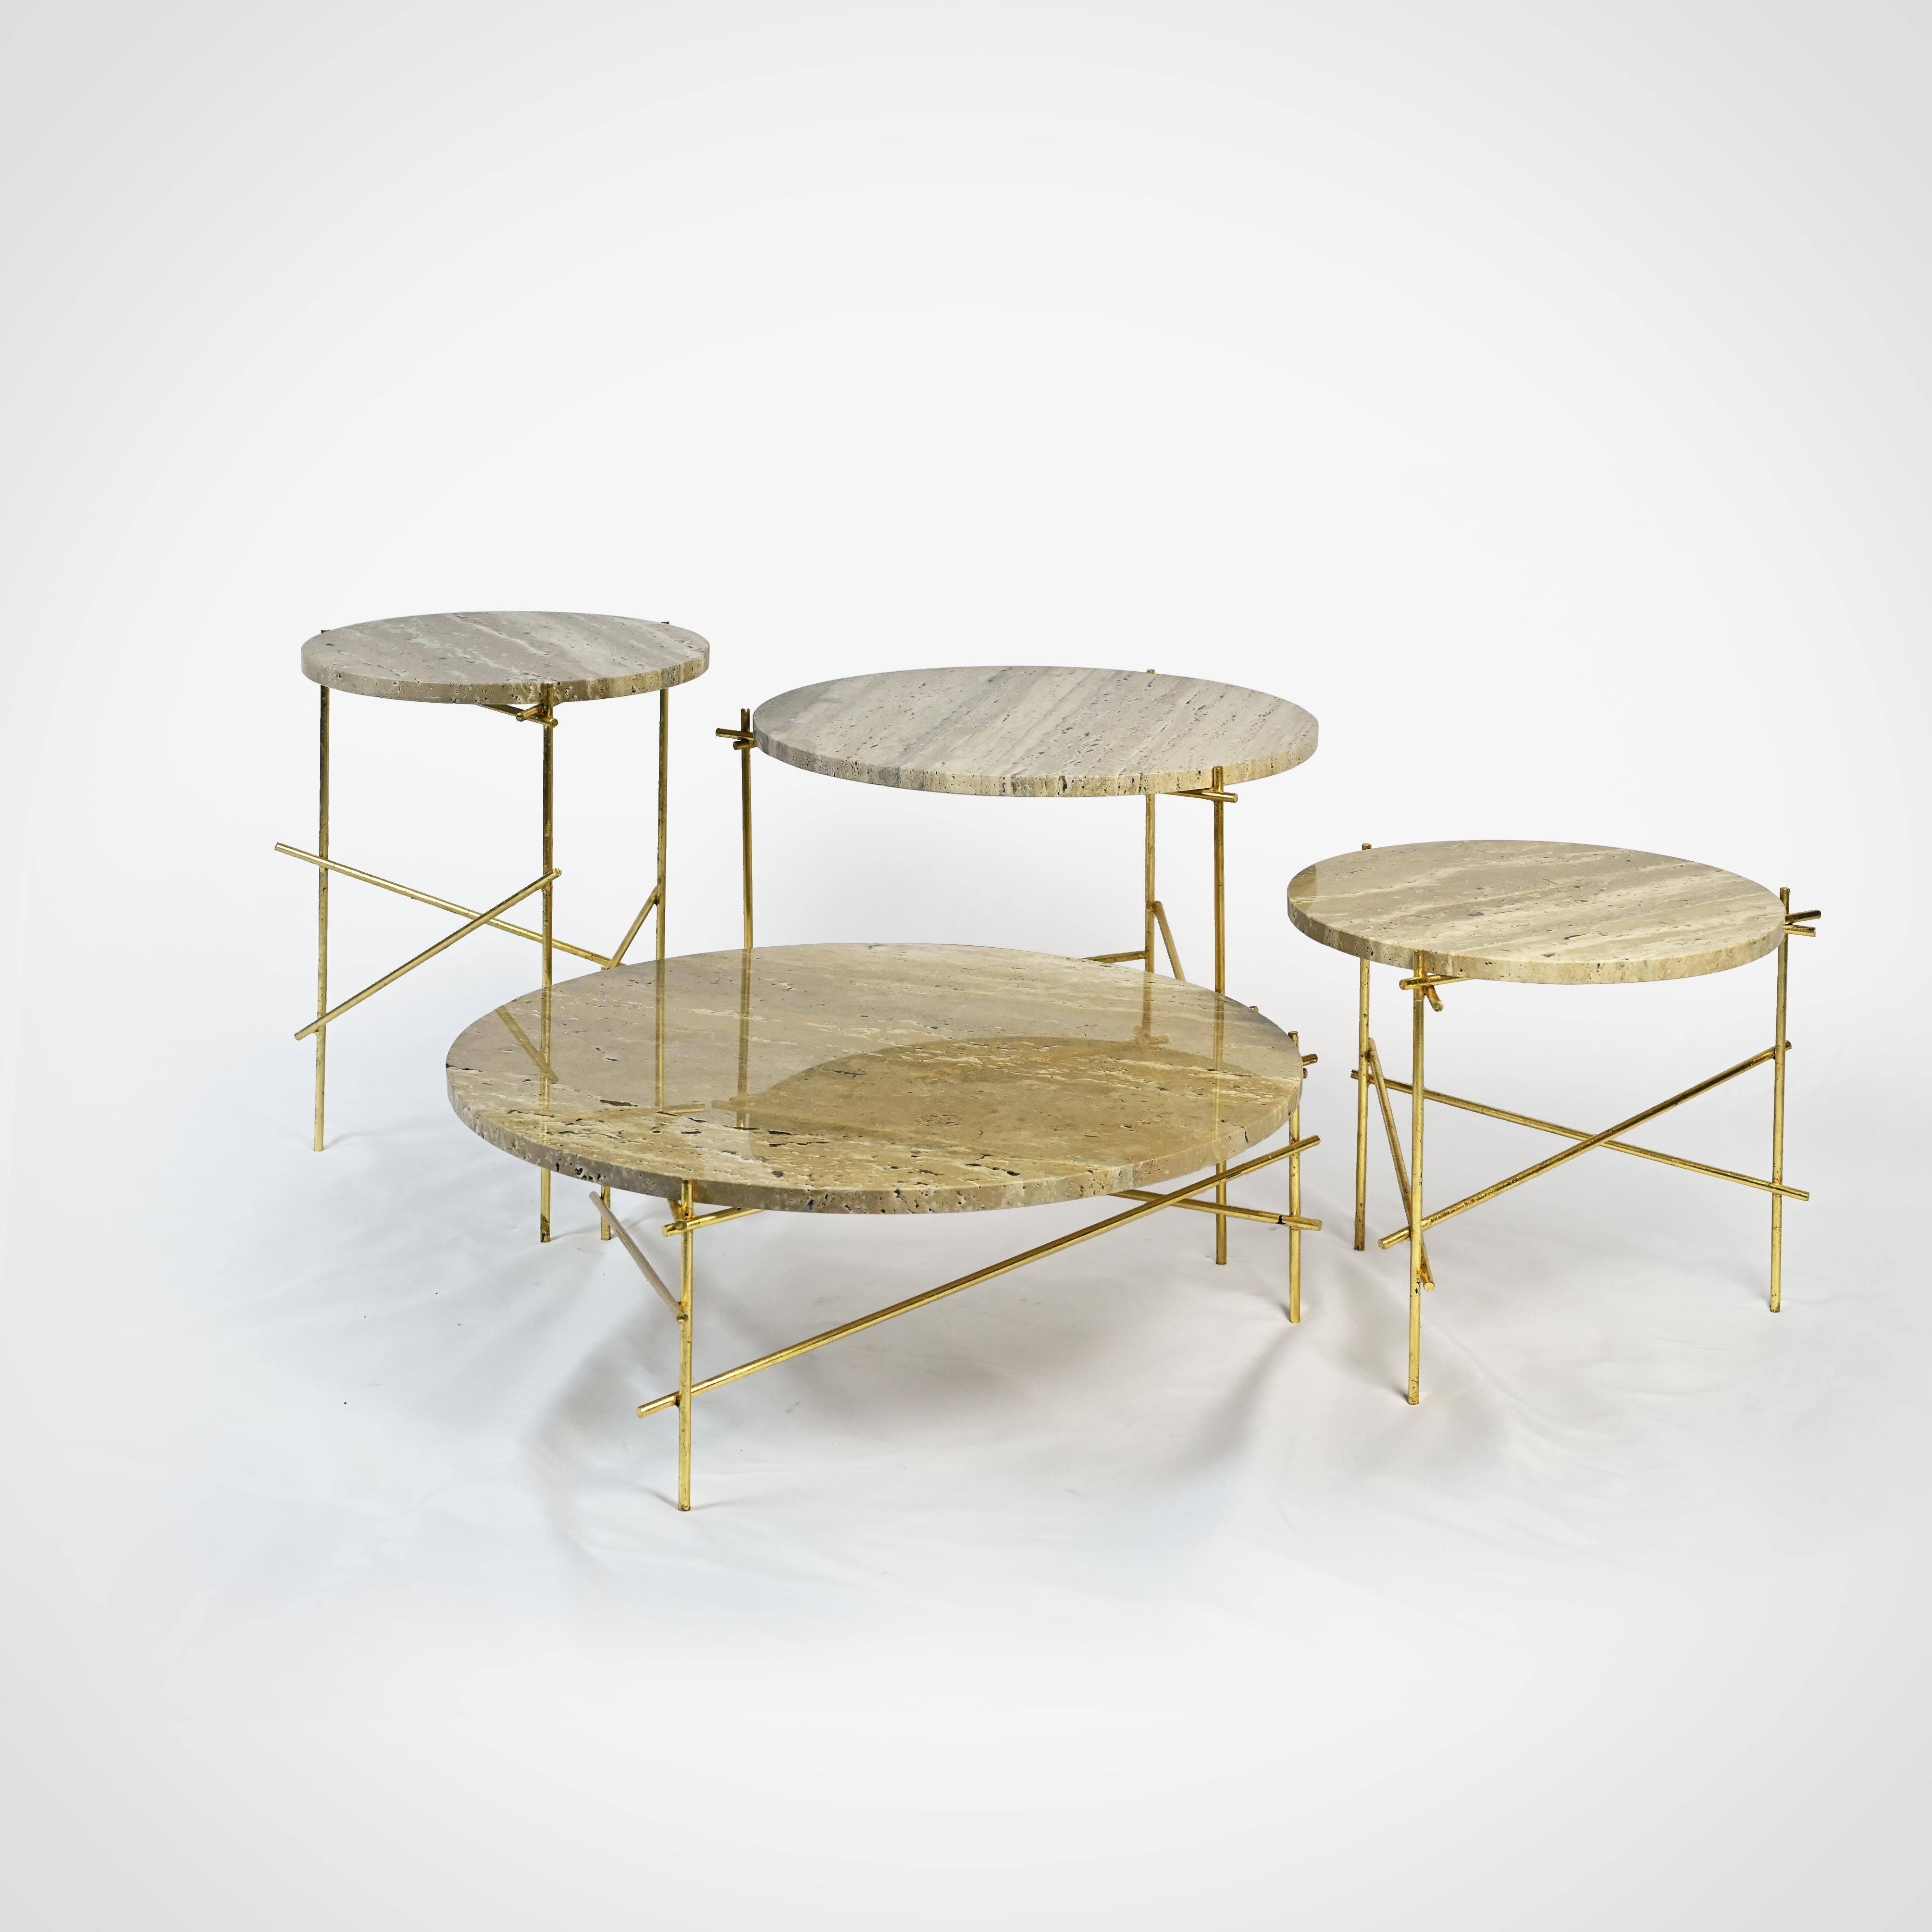 The Stilts coffee table collection is created through the combination of Carrara Marble tops and steel legs, which are finished with a golden leaf application.
The golden leaf application is purposely refined with a scratched effect, and works in